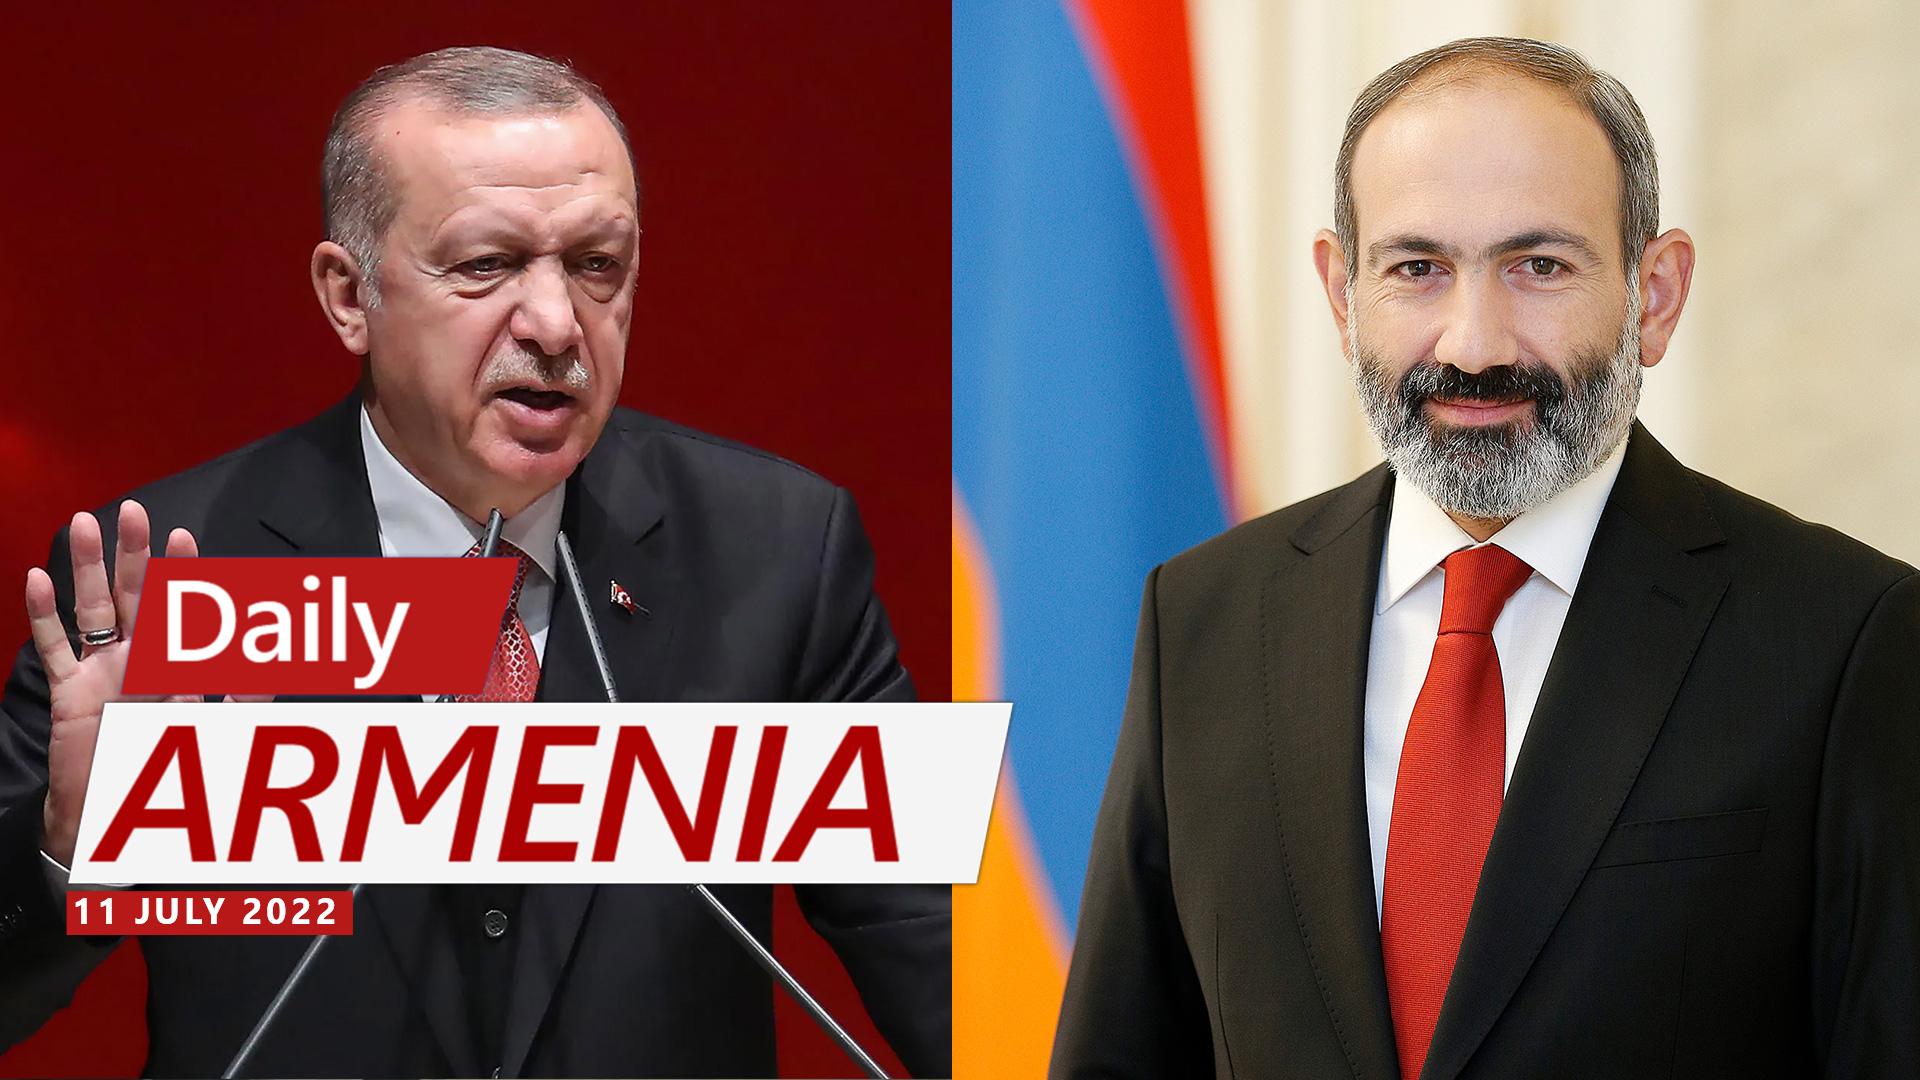 Pashinyan holds first-ever phone call with Erdogan